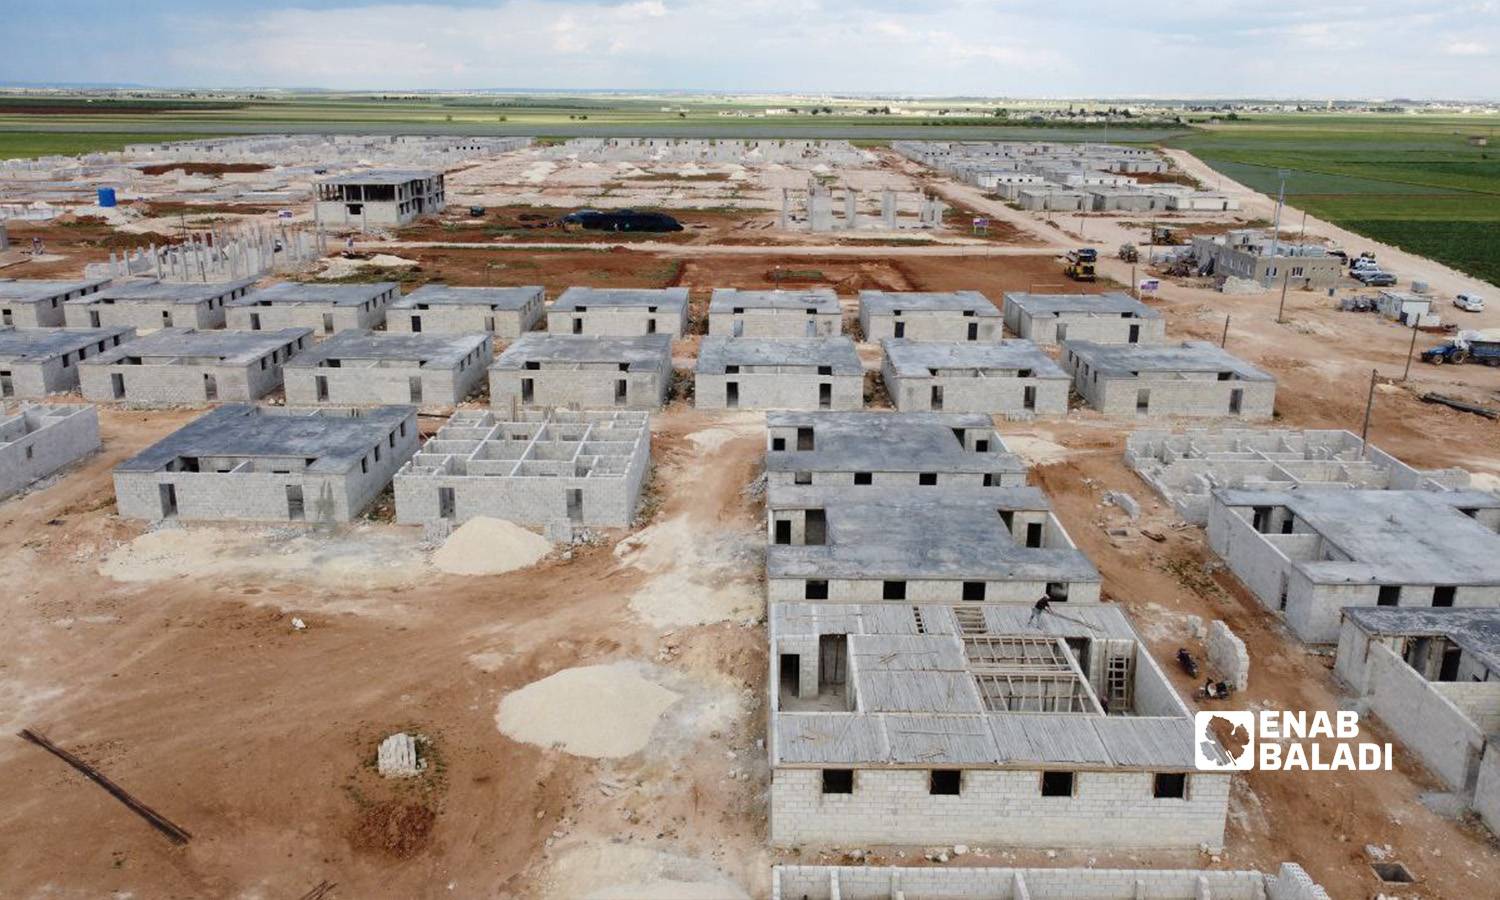 Housing units in the “City of Hope” project, whose construction is supervised by the Qatar Charity and the Turkish Humanitarian Relief Authority (İHH) - 21 June 2022 (Enab Baladi)